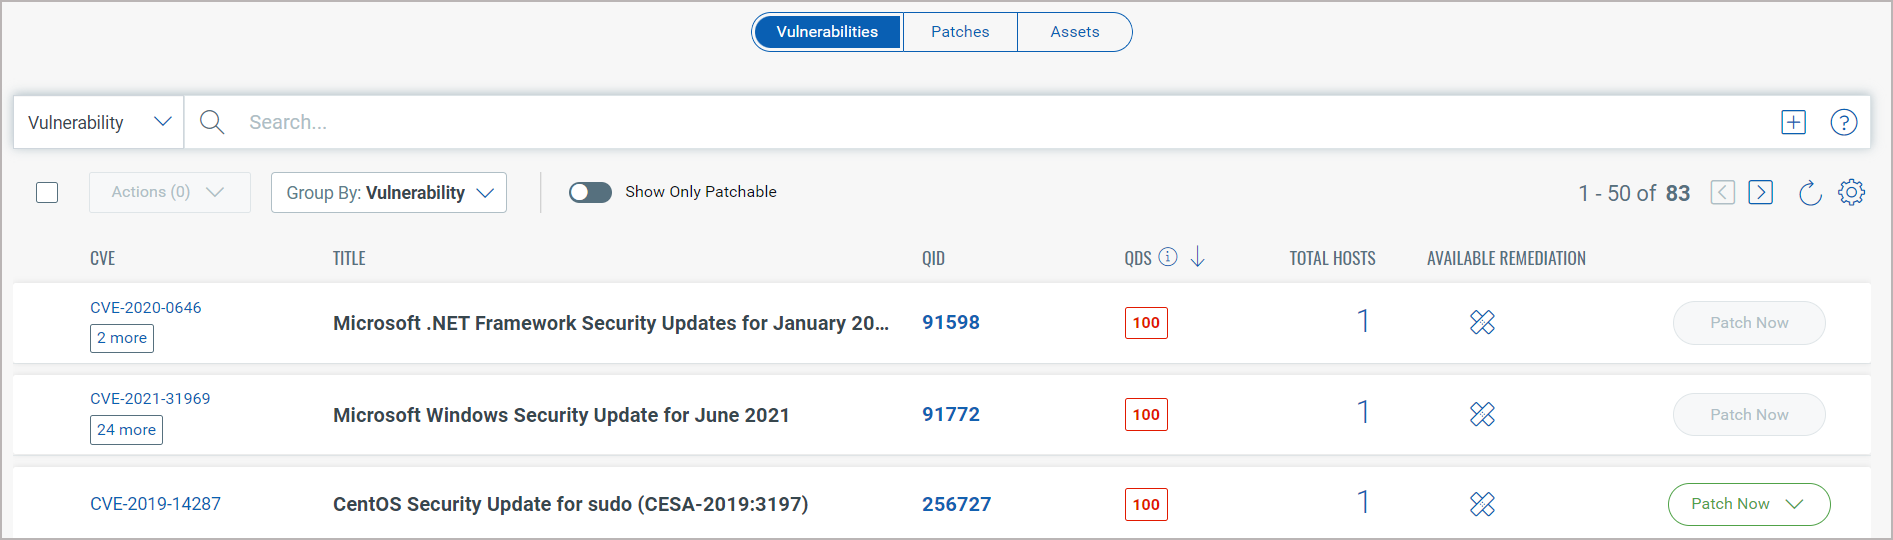 Detail information about vulnerabilities, patches and assets.